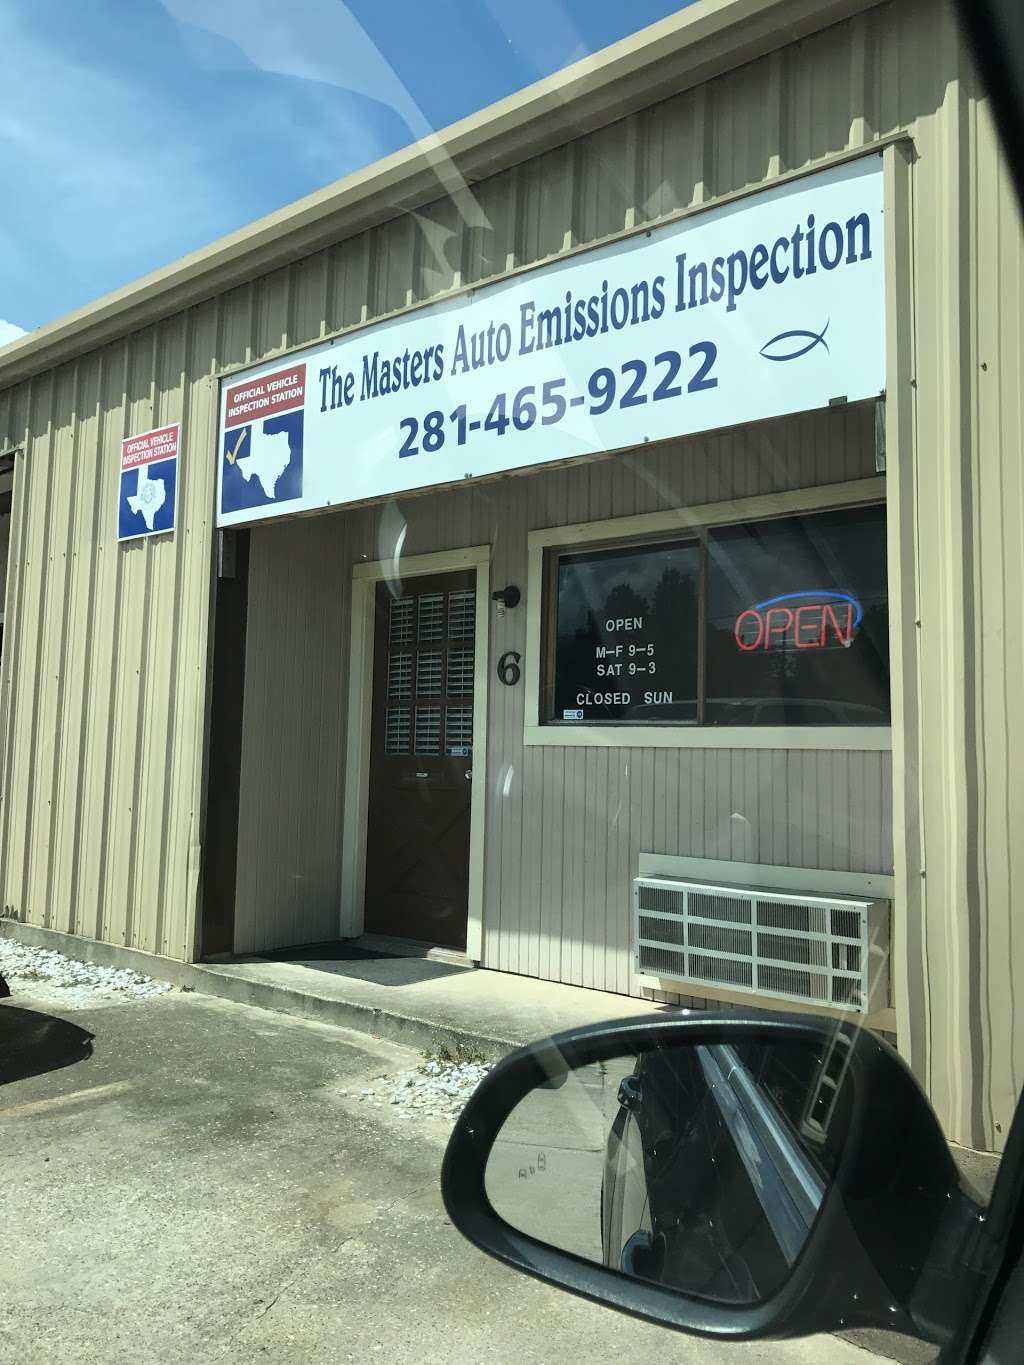 The Masters Auto Emission Inspection | 27493 Hanna Rd, Conroe, TX 77385 | Phone: (281) 465-9222